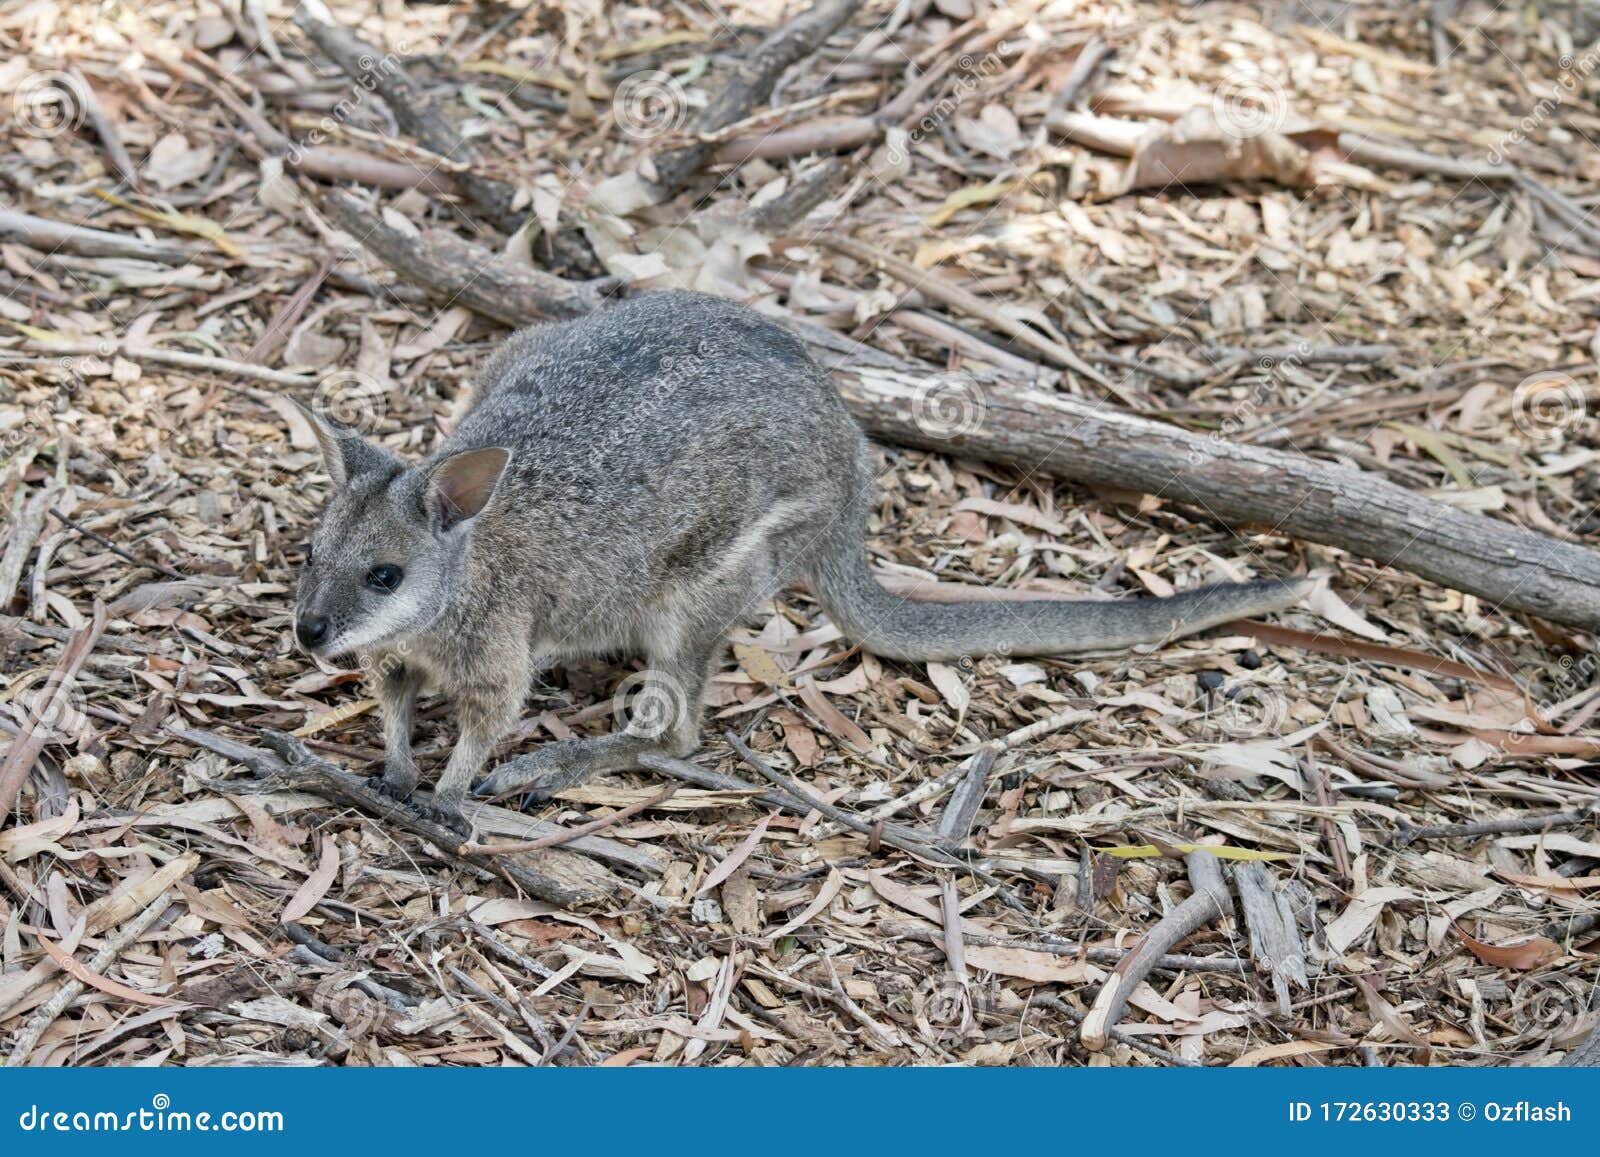 This Is A Side View Of A Tammar Wallaby Stock Image Image Of Tammar Wildlife 172630333,Steaming Green Beans